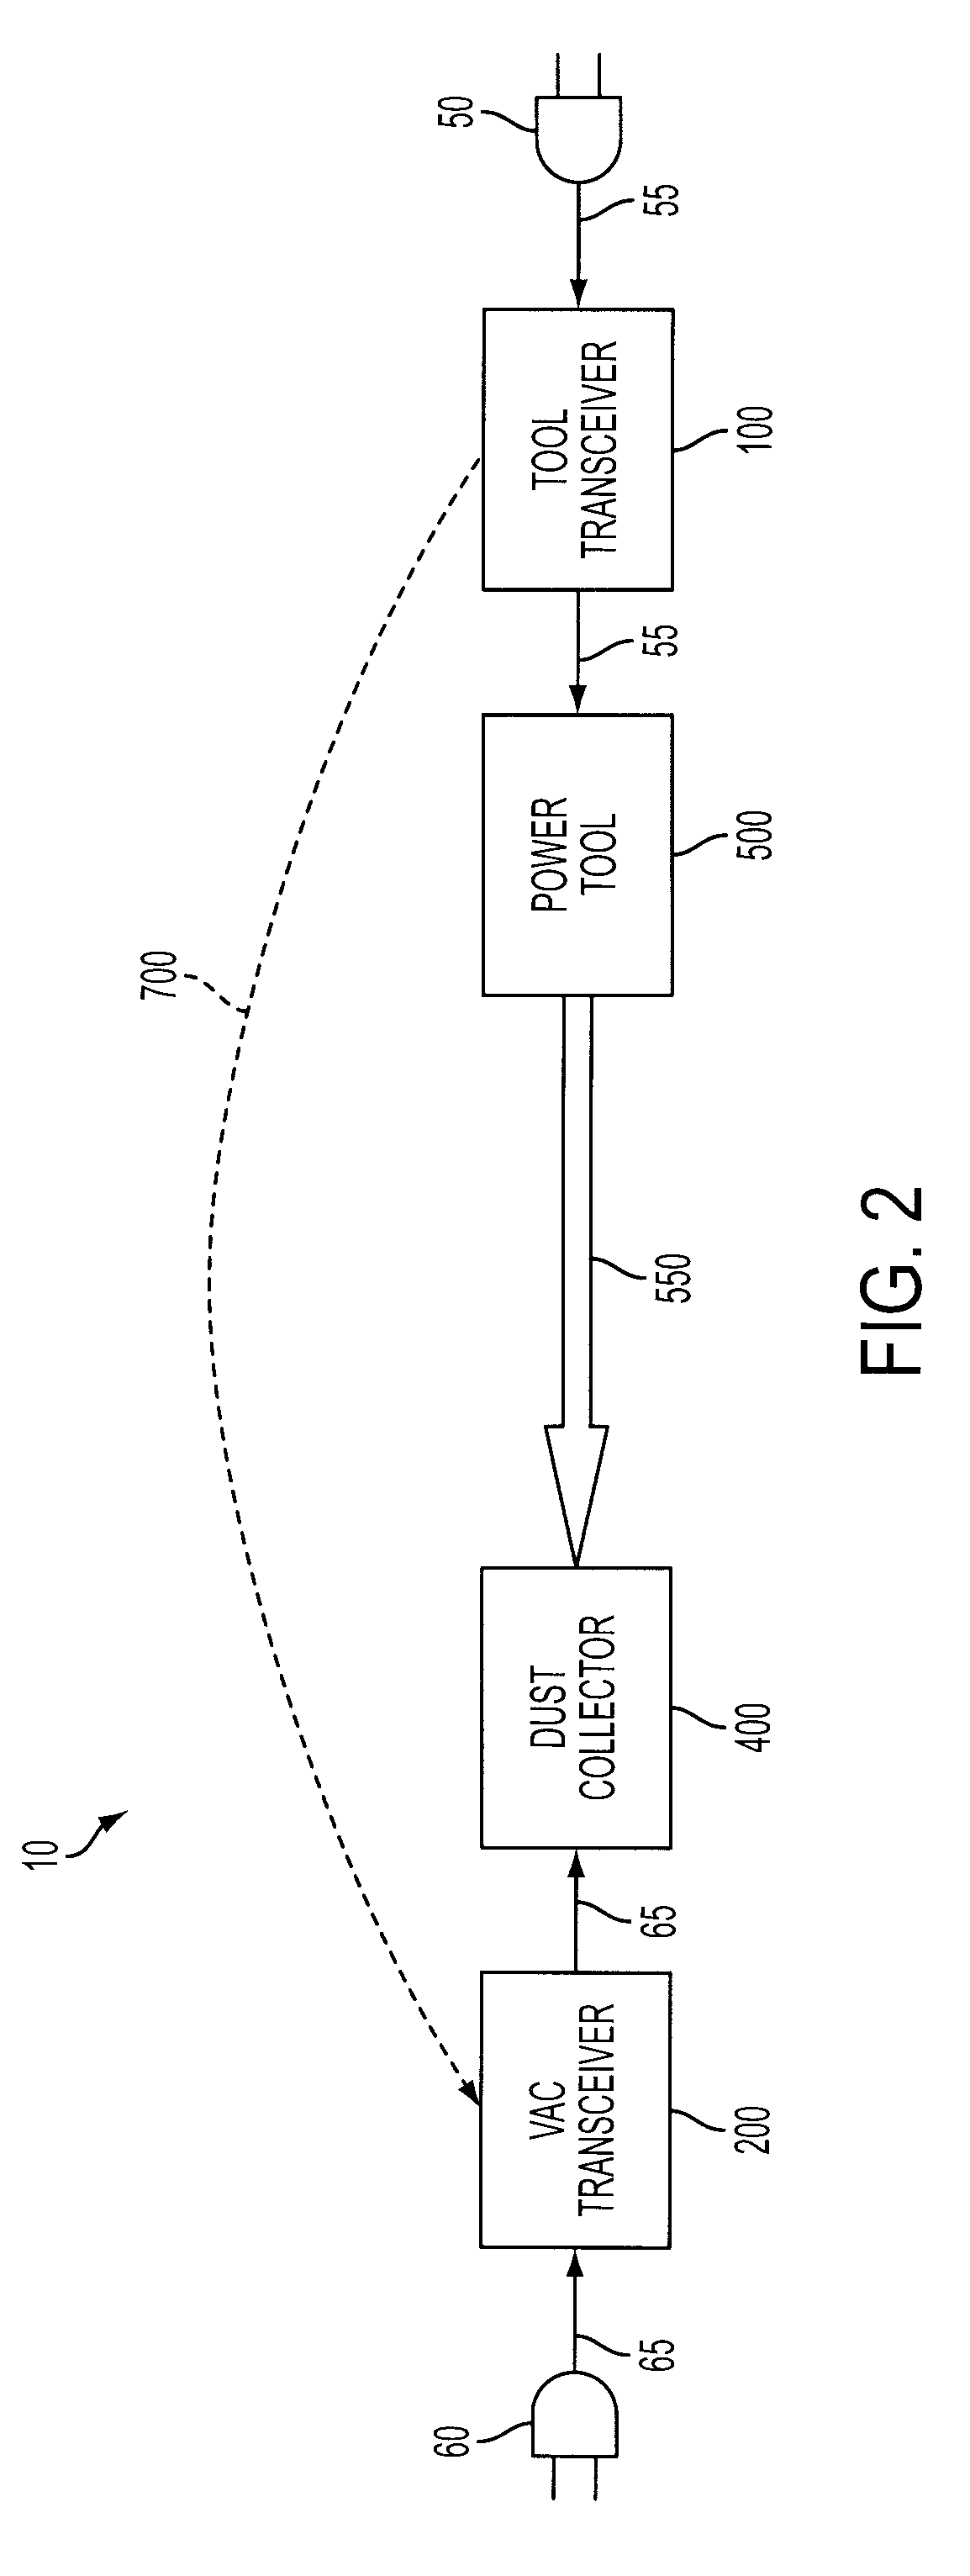 Wireless particle collection system